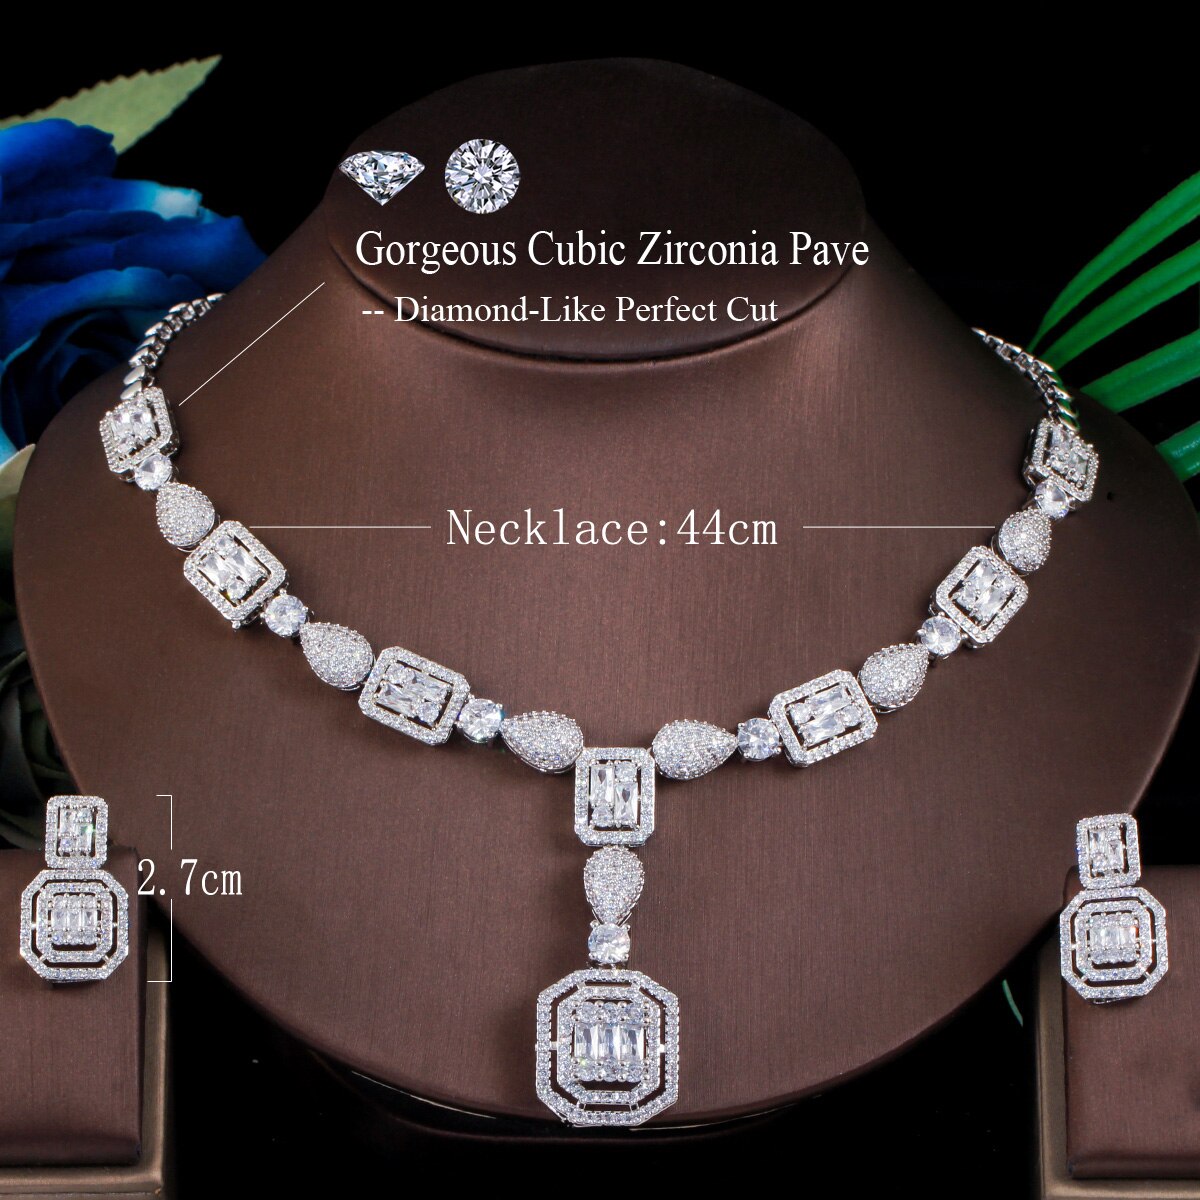 ThreeGraces-Elegant-Bridal-Wedding-Square-Necklace-Earrings-Sets-White-CZ-Crystal-Silver-Color-India-1005001616553168-2